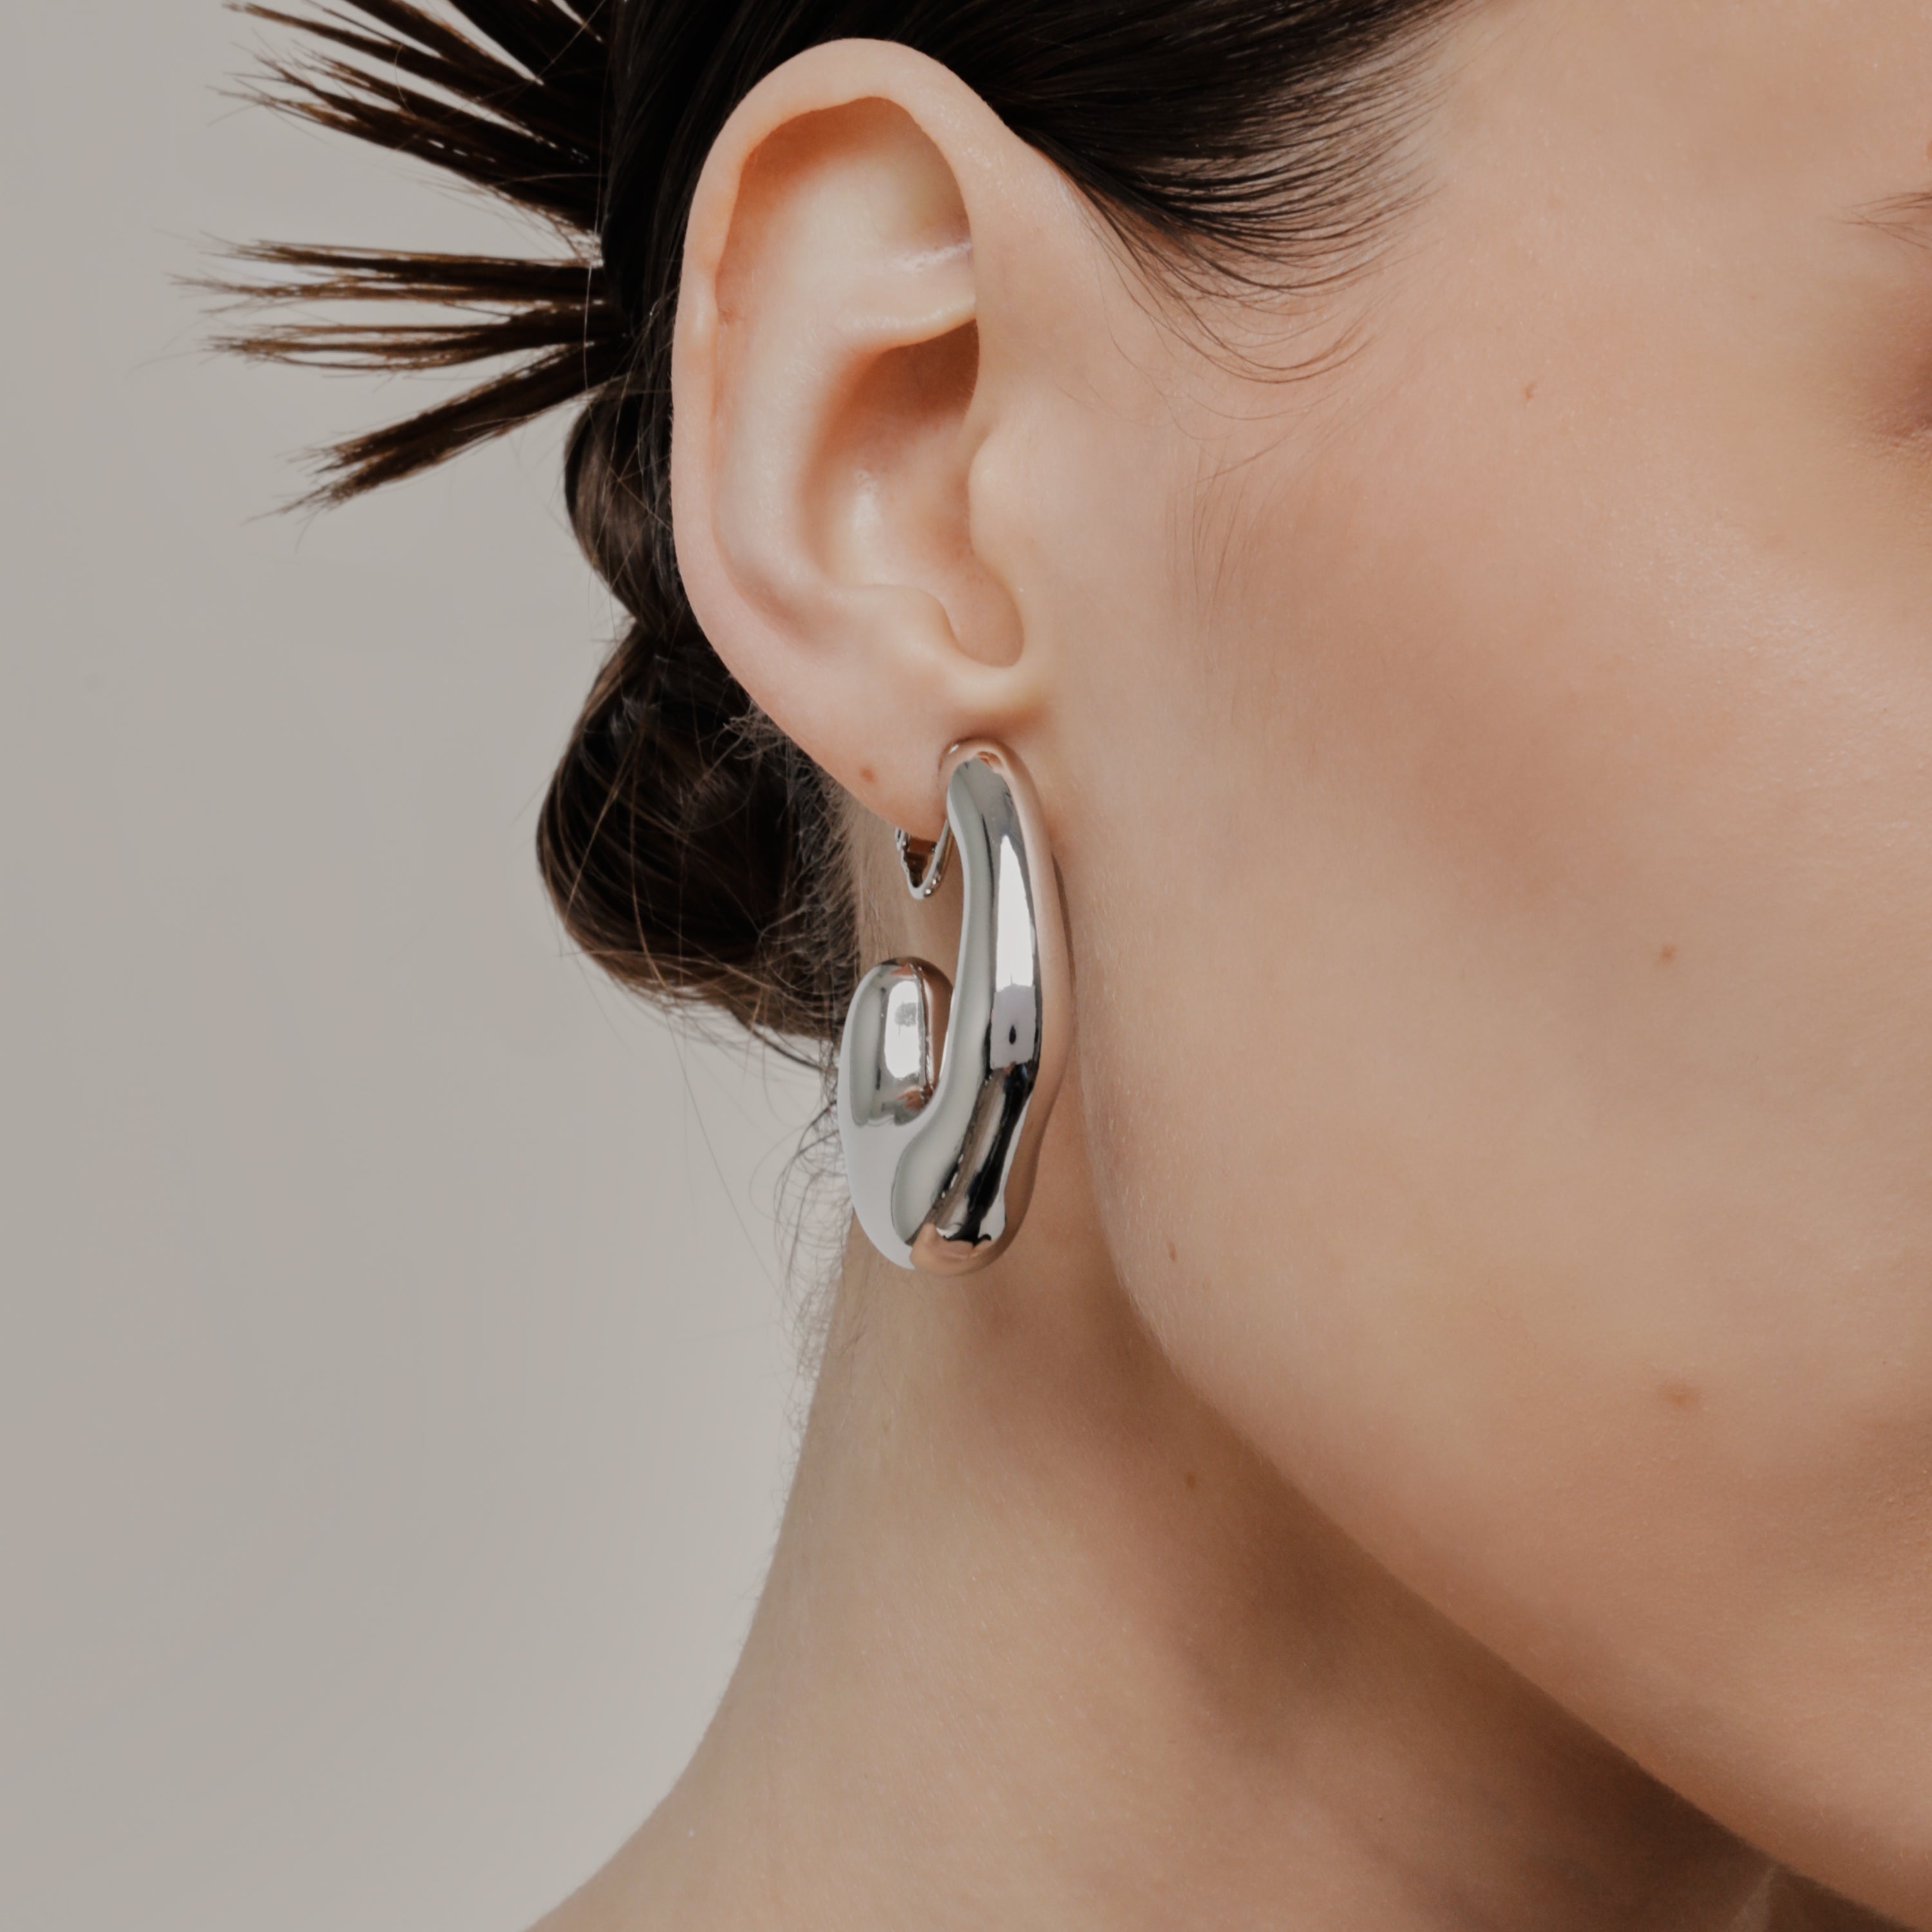 A model wearing the Curvy Hoop Clip On Earrings in Silver. These earrings offer comfort and versatility with a secure screwback closure that suits all ear sizes. Enjoy 8-12 hours of wear without discomfort, suitable for any ear type. Please note that each purchase includes one pair.